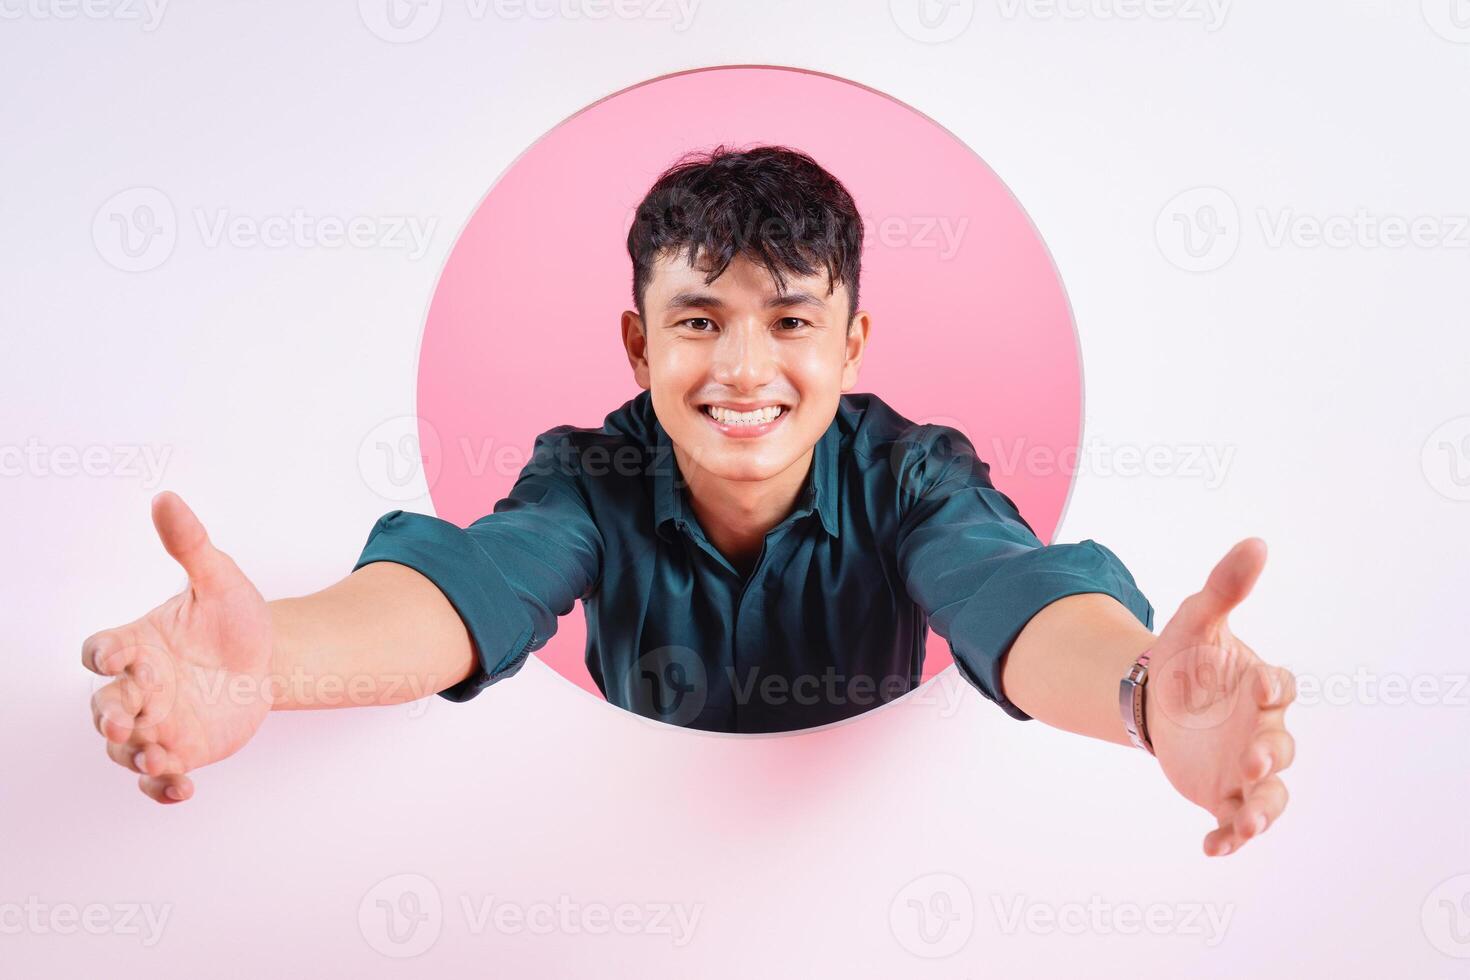 Photo of young Asian man on background